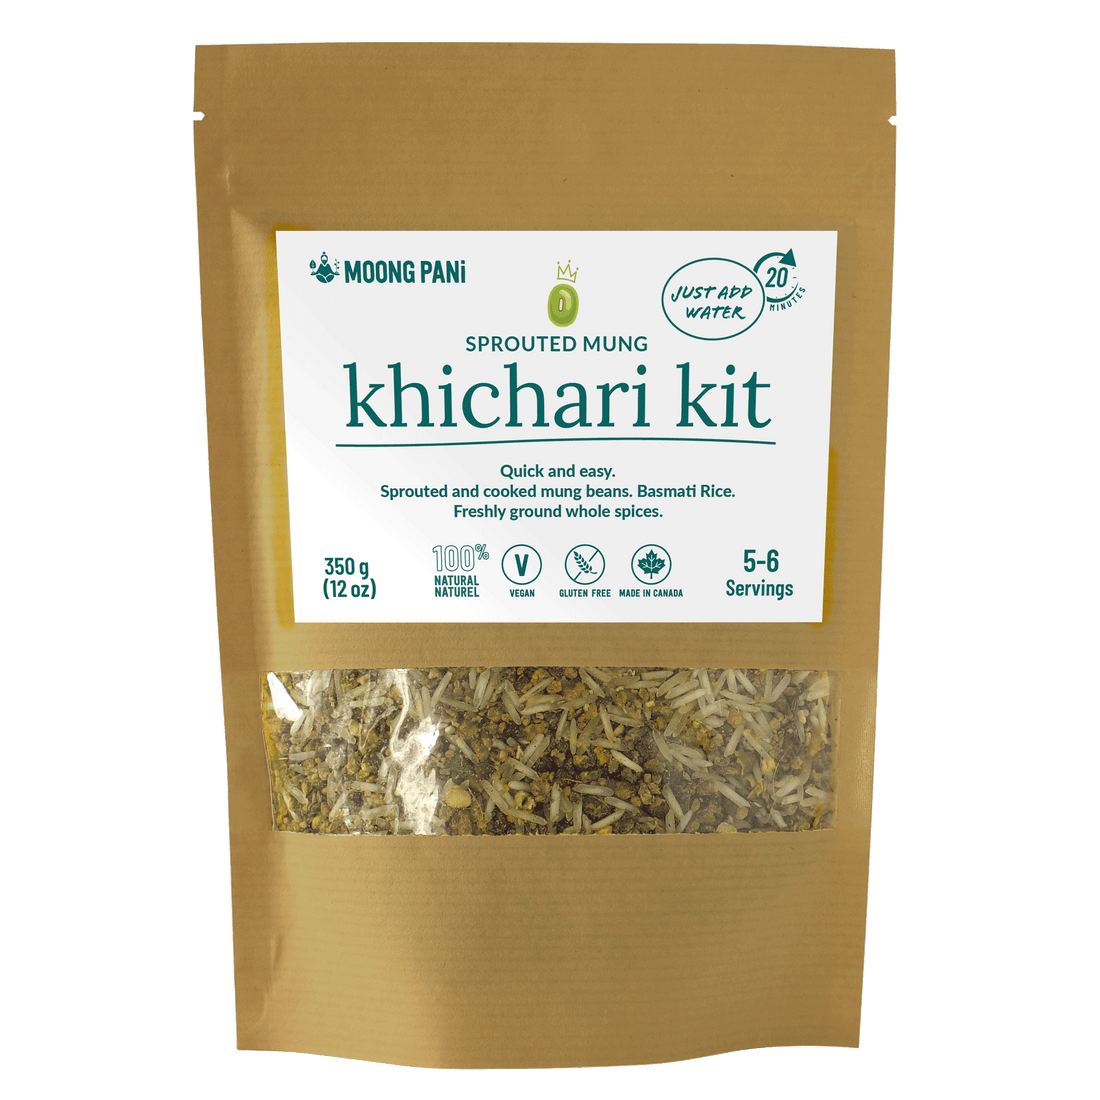 Moong Pani Sprouted Mung Khichari Kit. Vegan, Gluten-free, 100% natural and made in Canada.